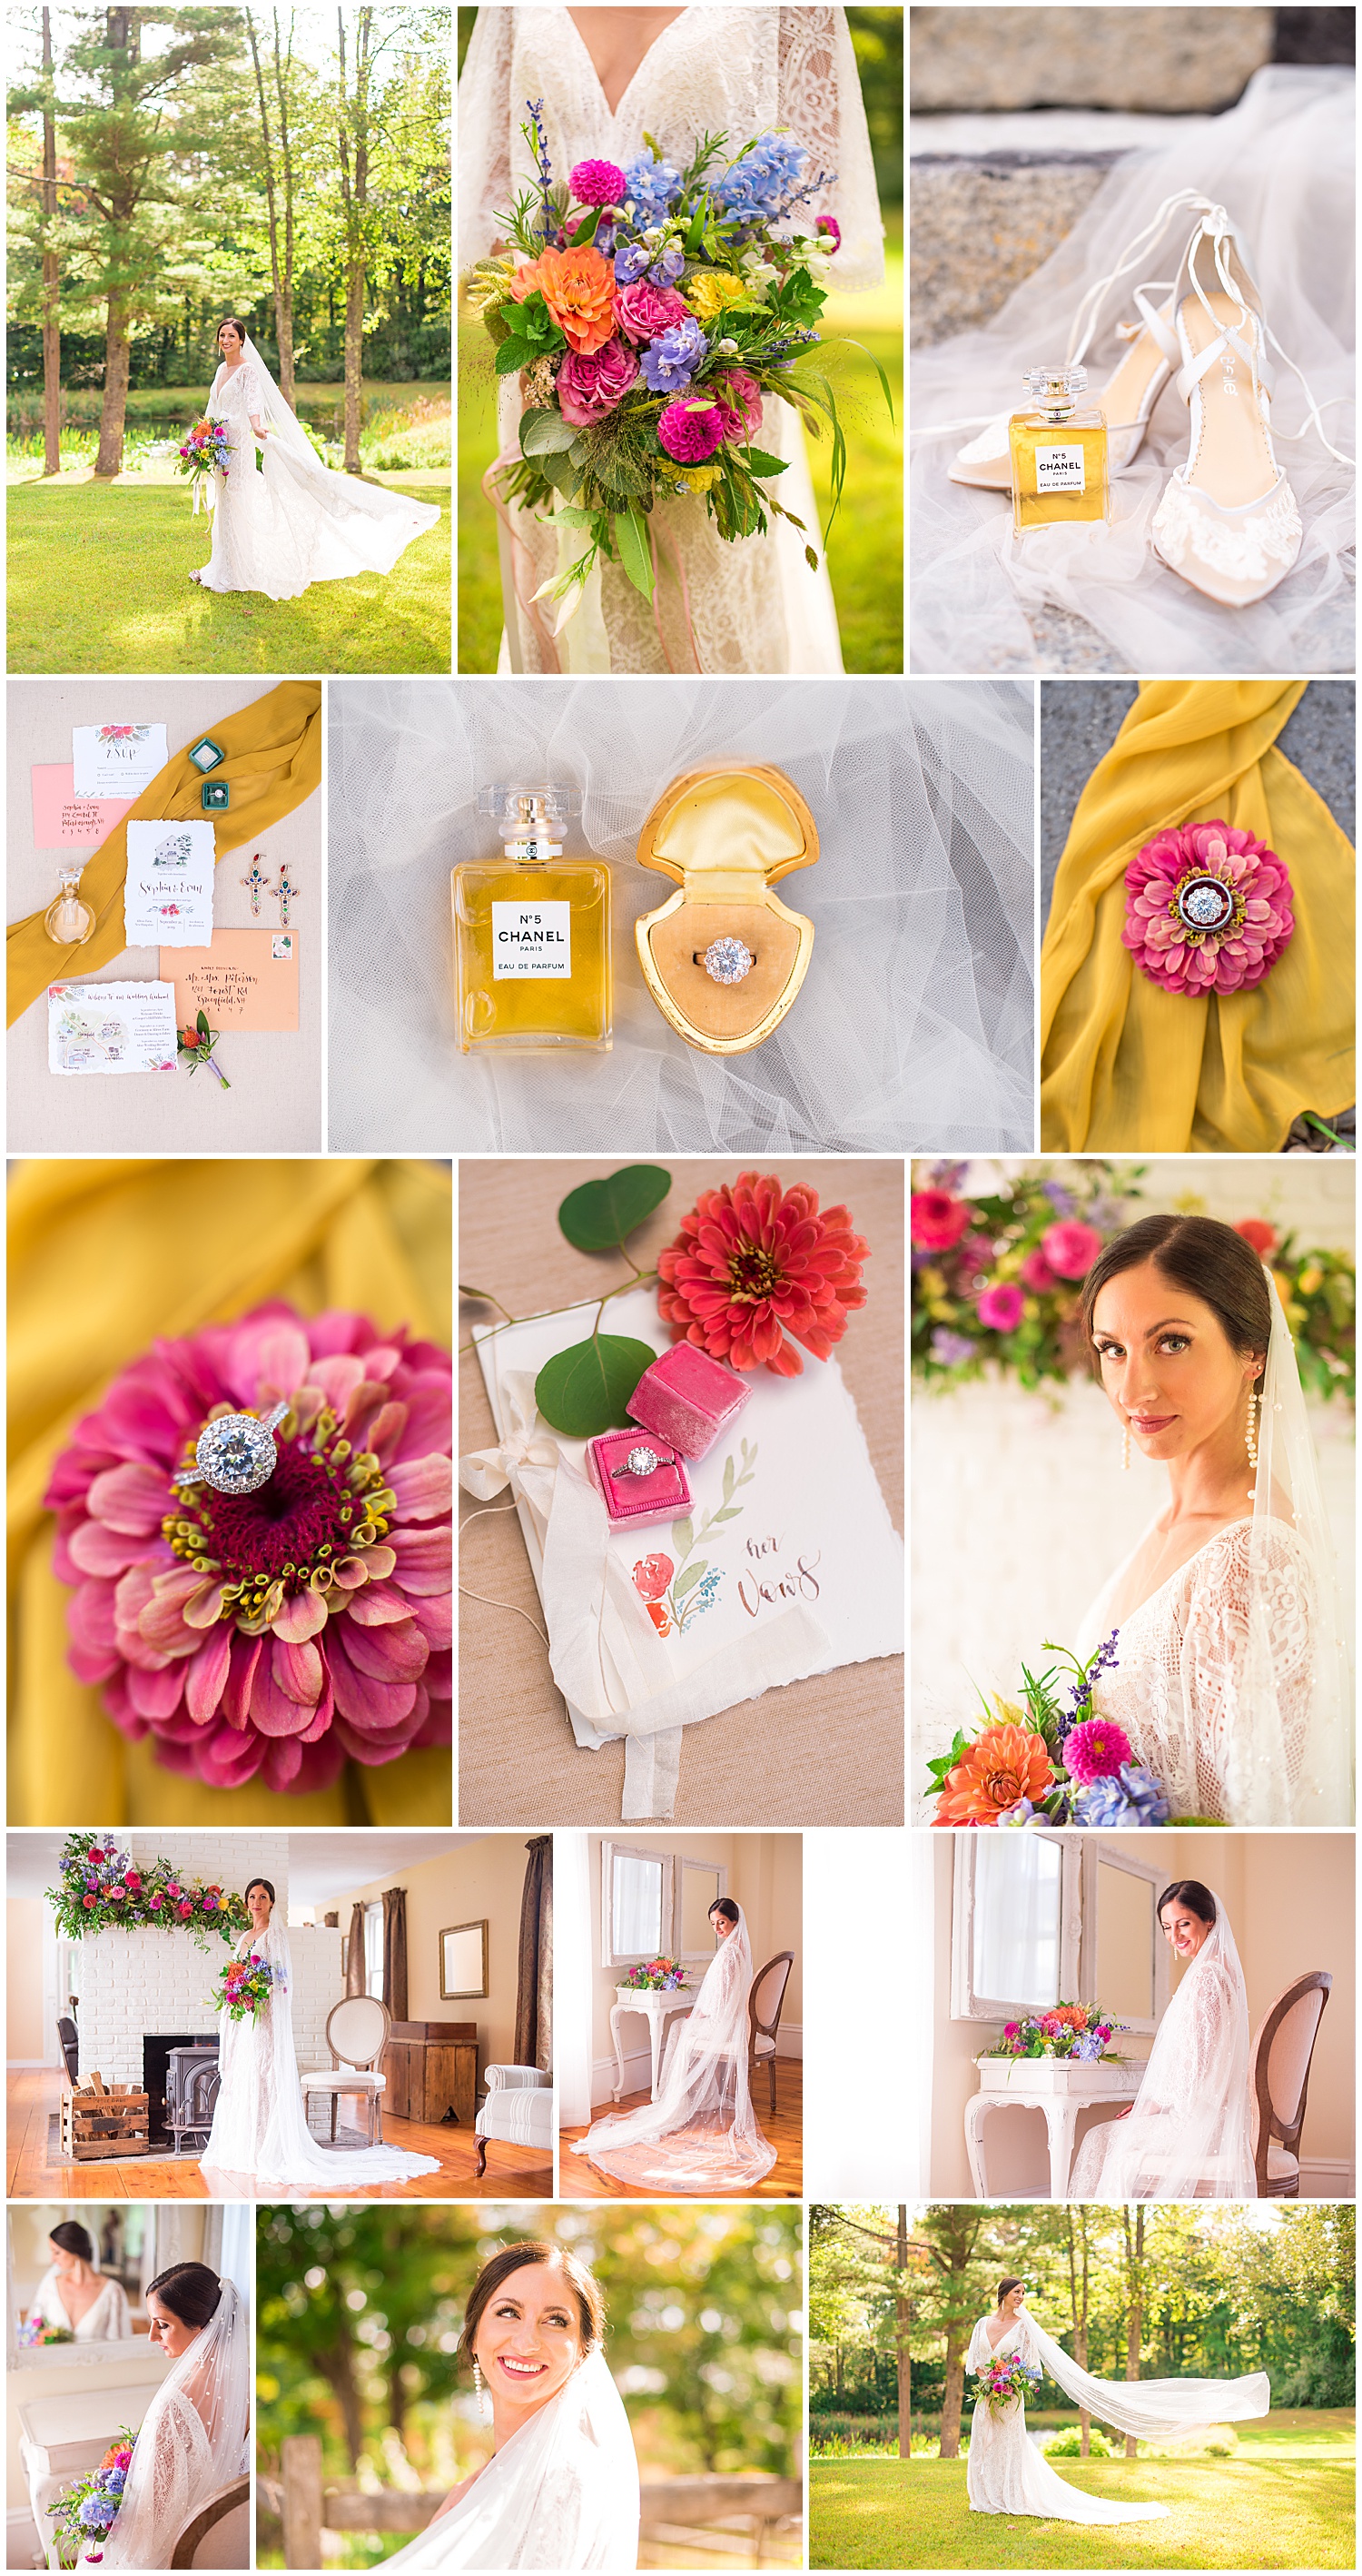 BRIDAL DETAILS FROM A COLORFUL STYLED SHOOT AT ALLROSE FARM